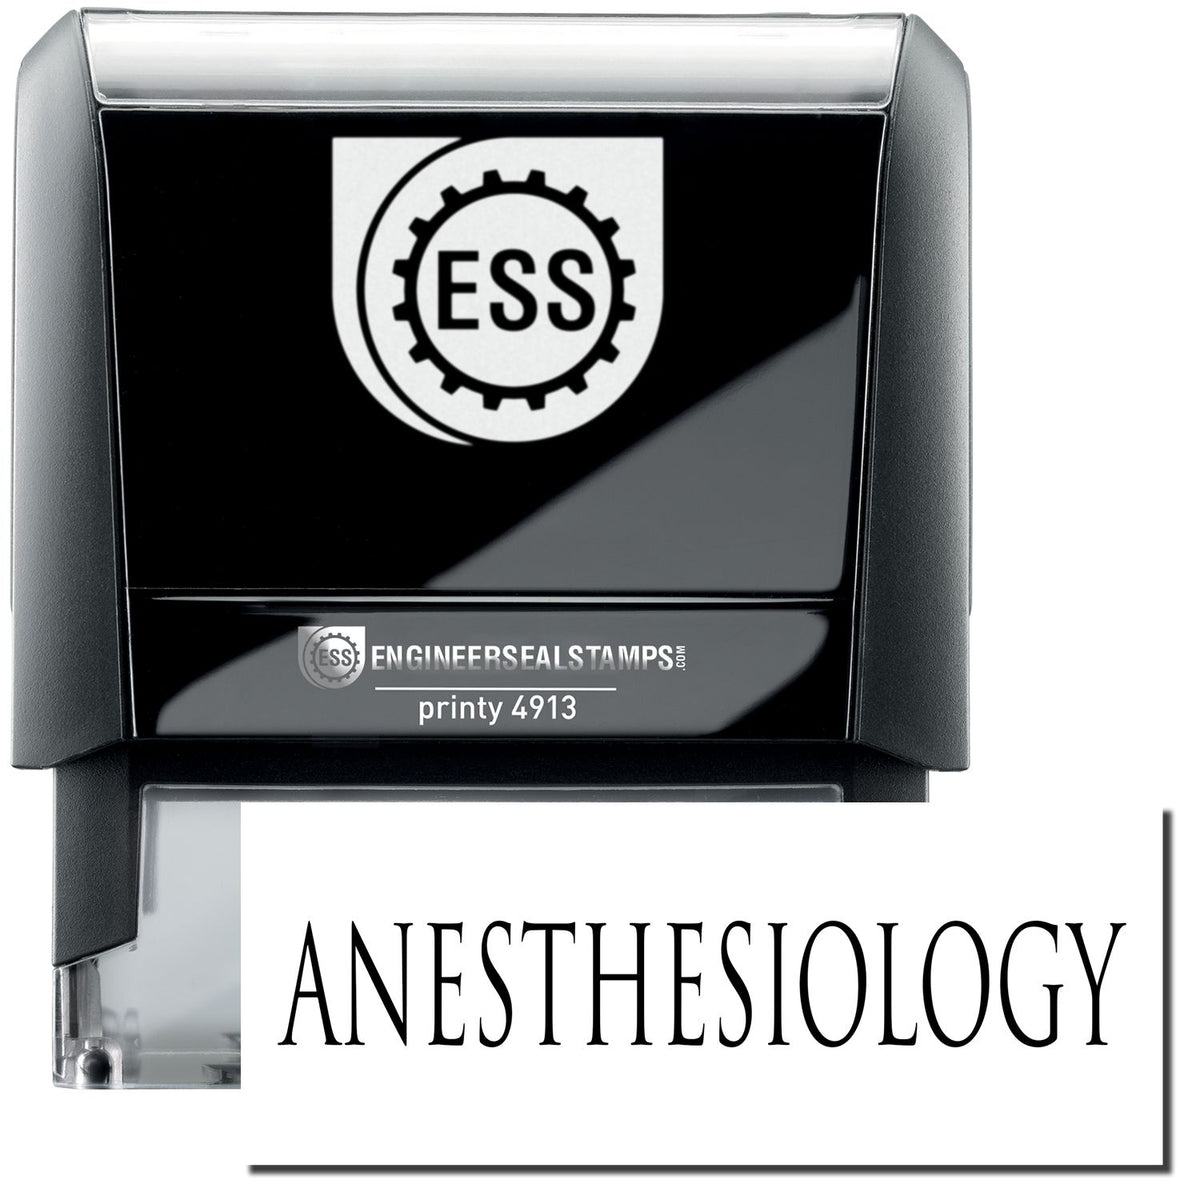 A self-inking stamp with a stamped image showing how the text &quot;ANESTHESIOLOGY&quot; in a large font is displayed by it.